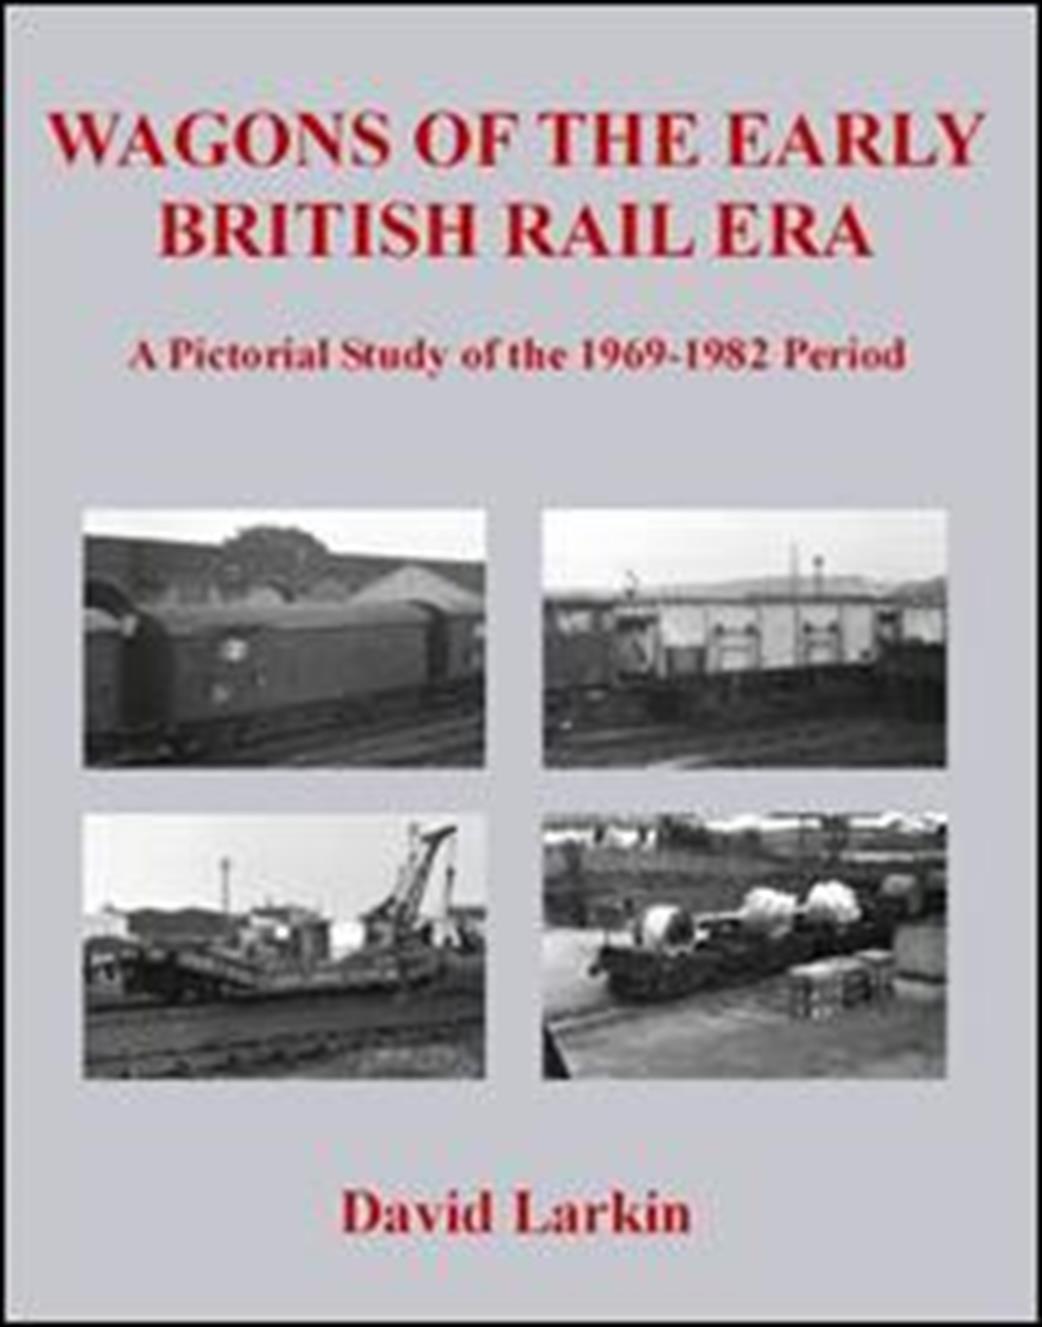 9781905505104 Wagons of the Early British Rail Era A Pictorial Study of the 1969 to 1982 Period